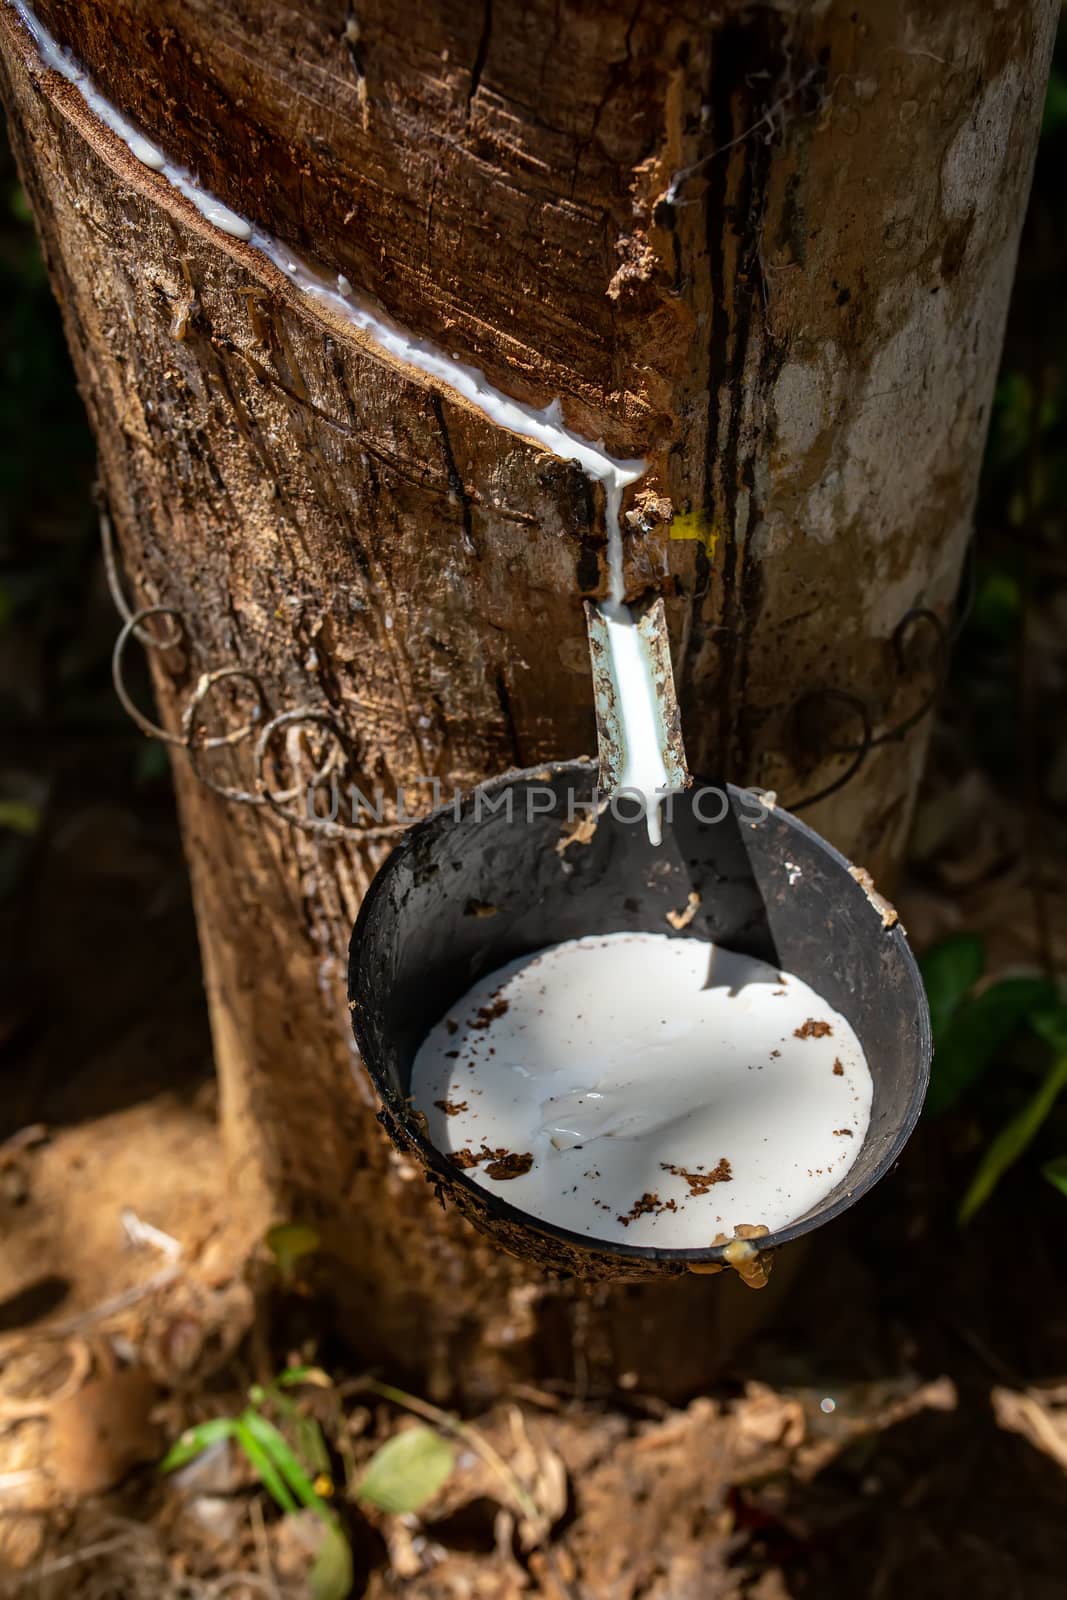 Natural rubber latex, rubber extraction from Hevea wood. White milky juice latex from hevea flows from an incision into a special bowl. Latex being collected from a tapped rubber tree.